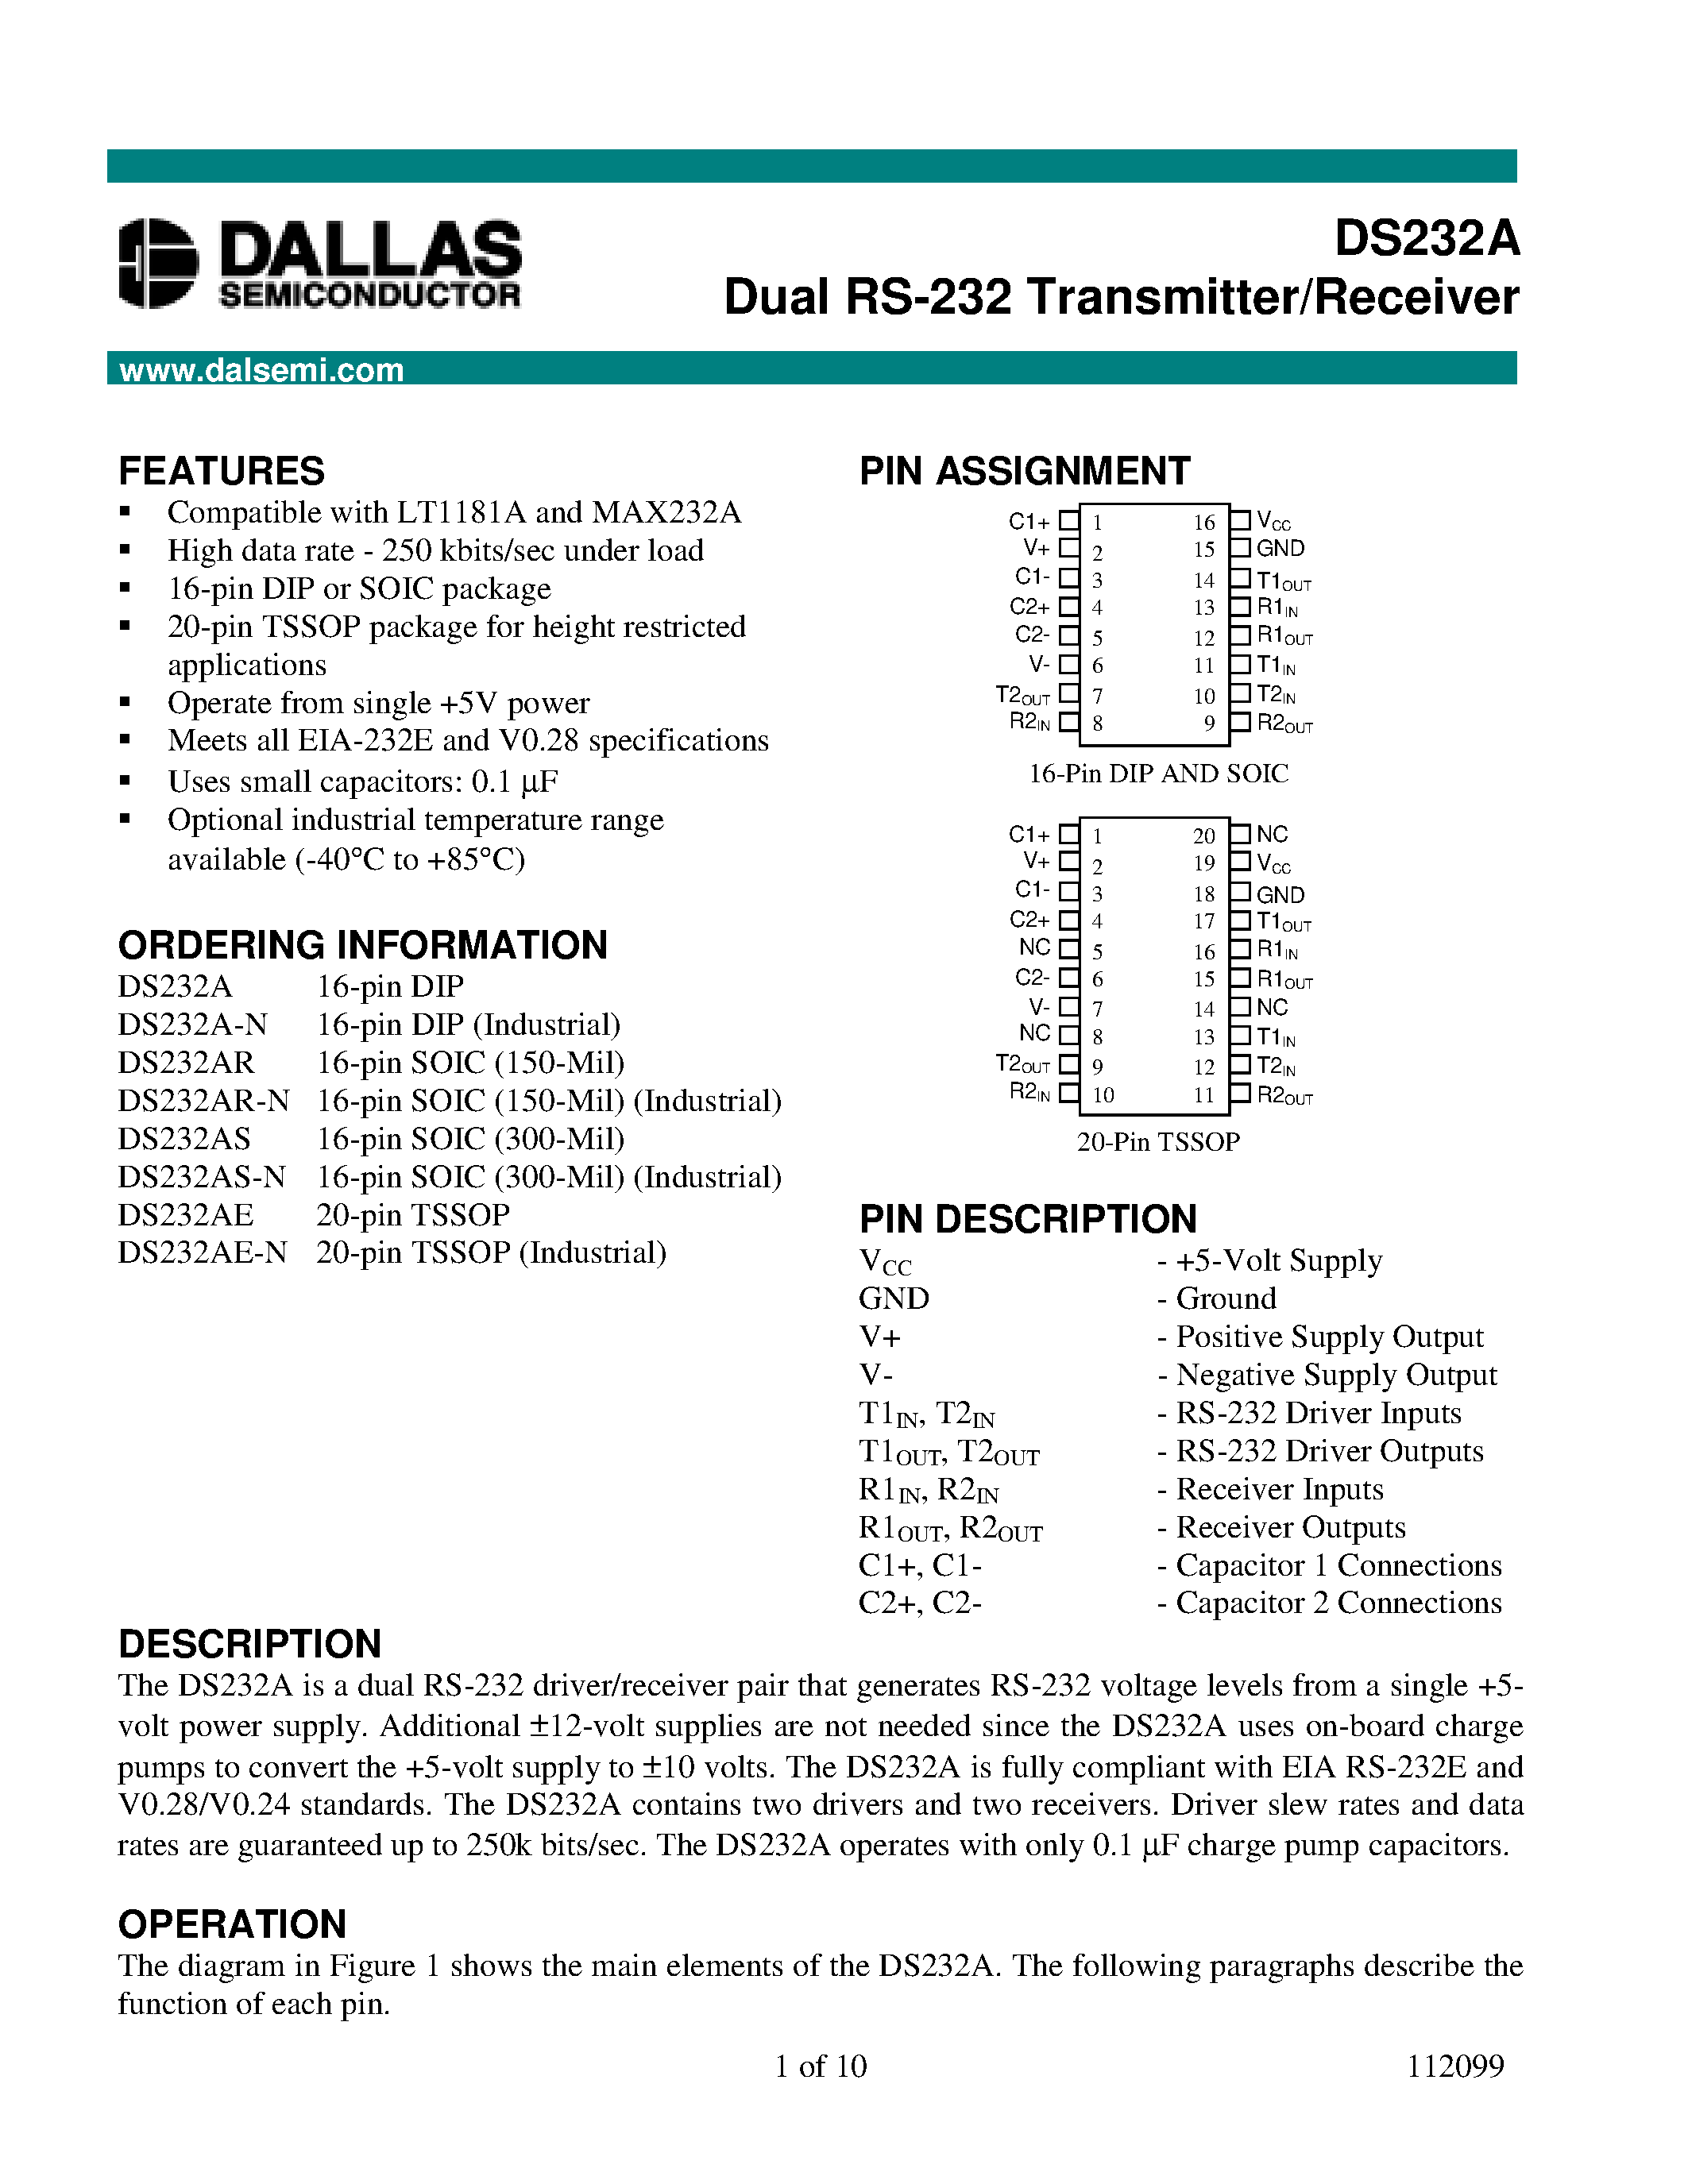 Datasheet DS232A-N - Dual RS-232 Transmitter/Receiver page 1